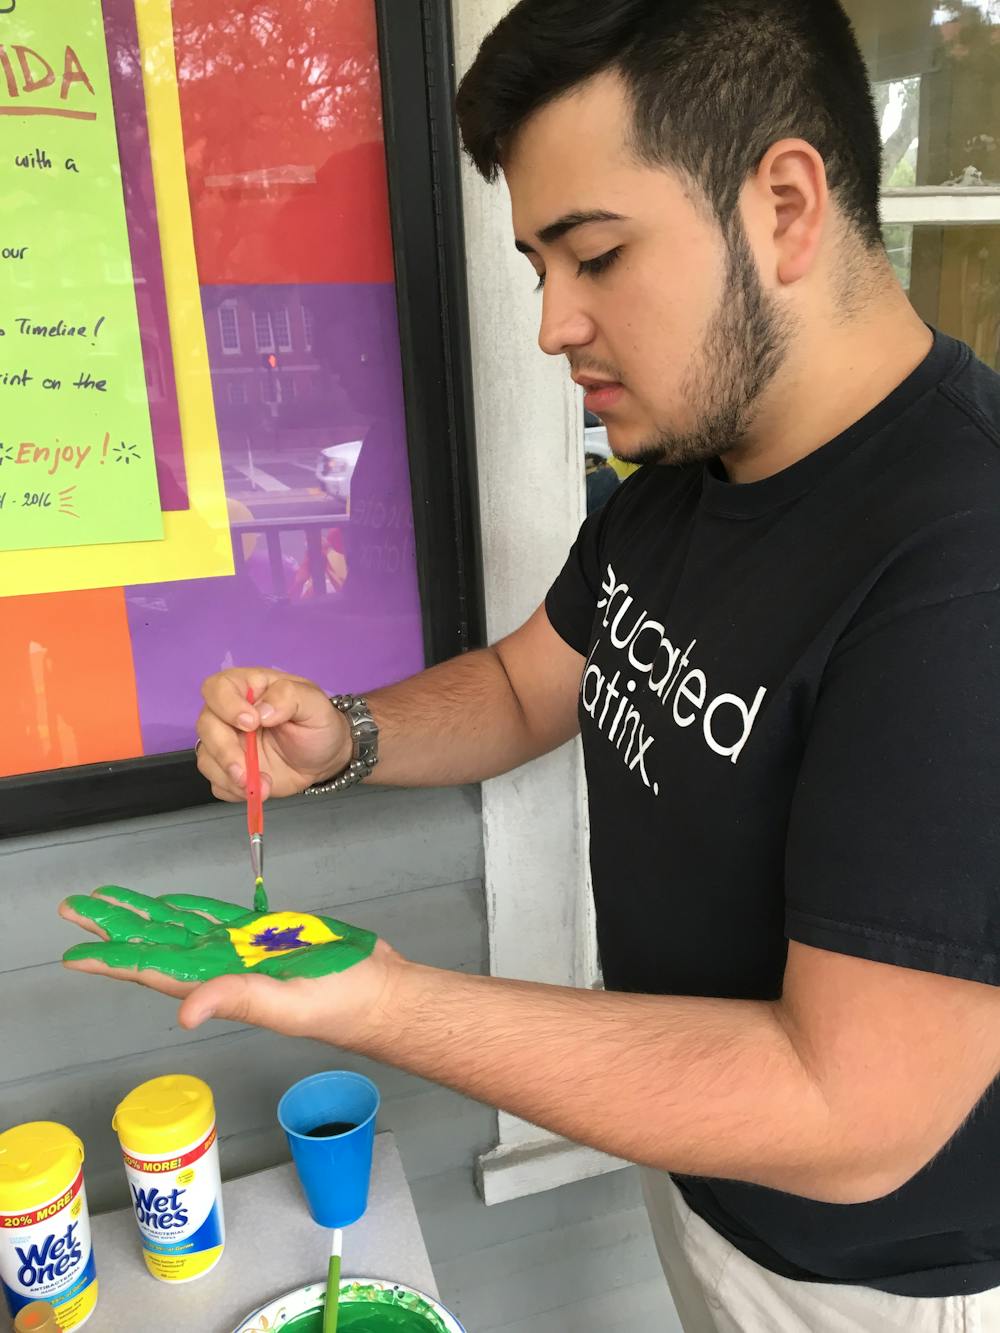 <p><span id="docs-internal-guid-149829e4-ed9f-f3fc-0bb9-9a7e8206168b"><span>Gabriel Costa, a 20-year-old UF music performance and nutrition sophomore, paints the flag of Brazil onto his hand to decorate the front of La Casita. Students left their handprints on the building as a final farewell.</span></span></p>